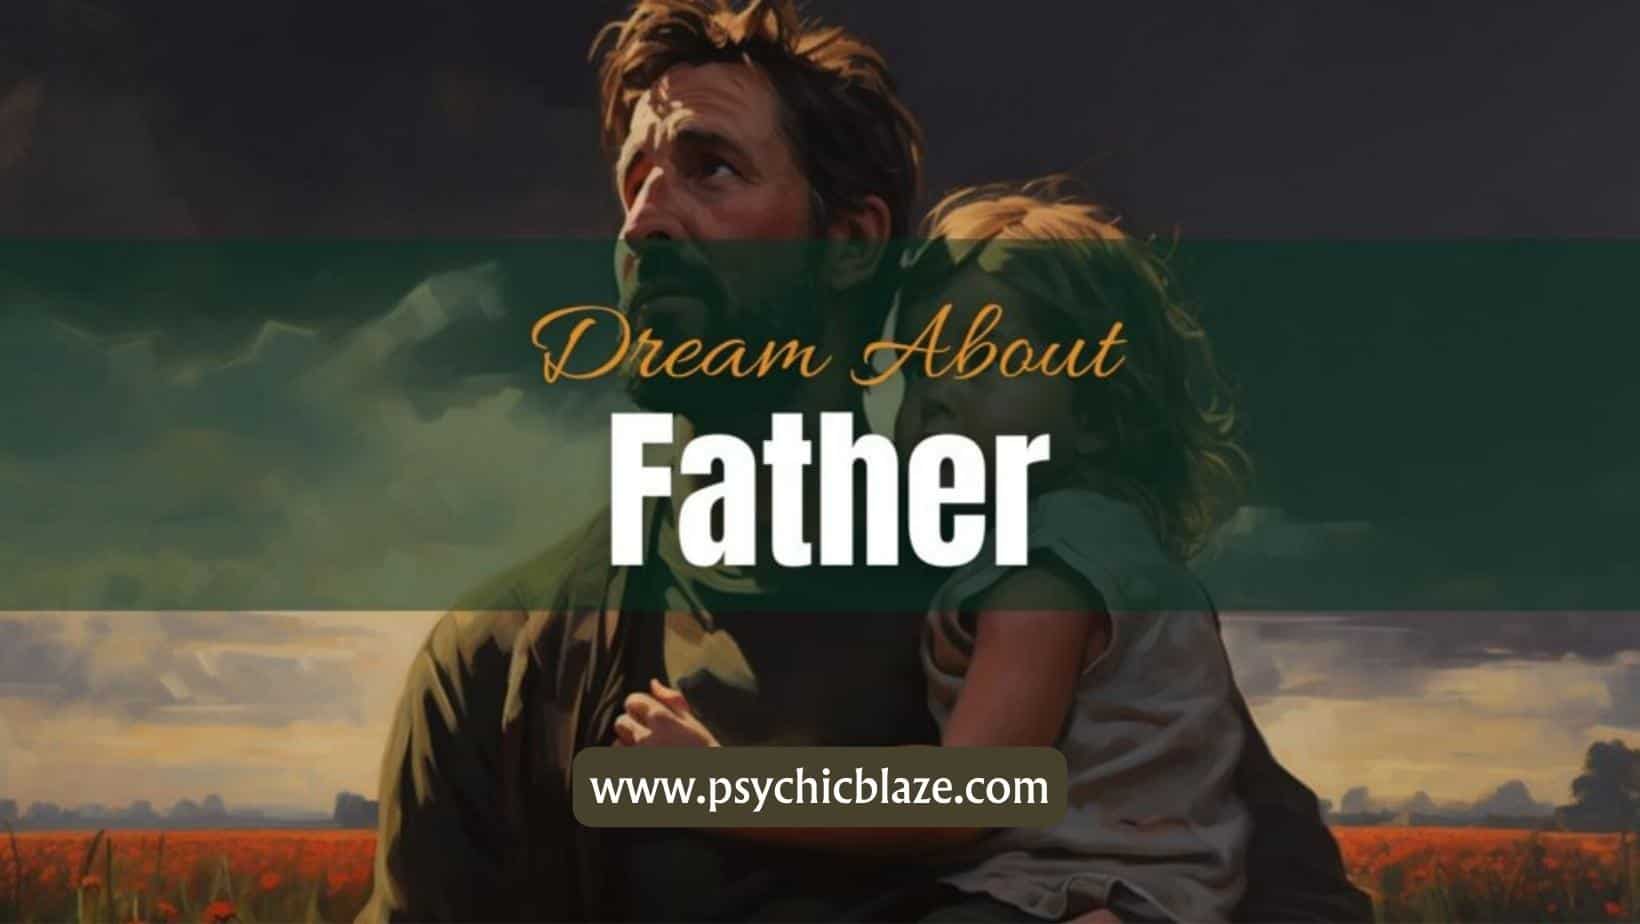 Dream about Father